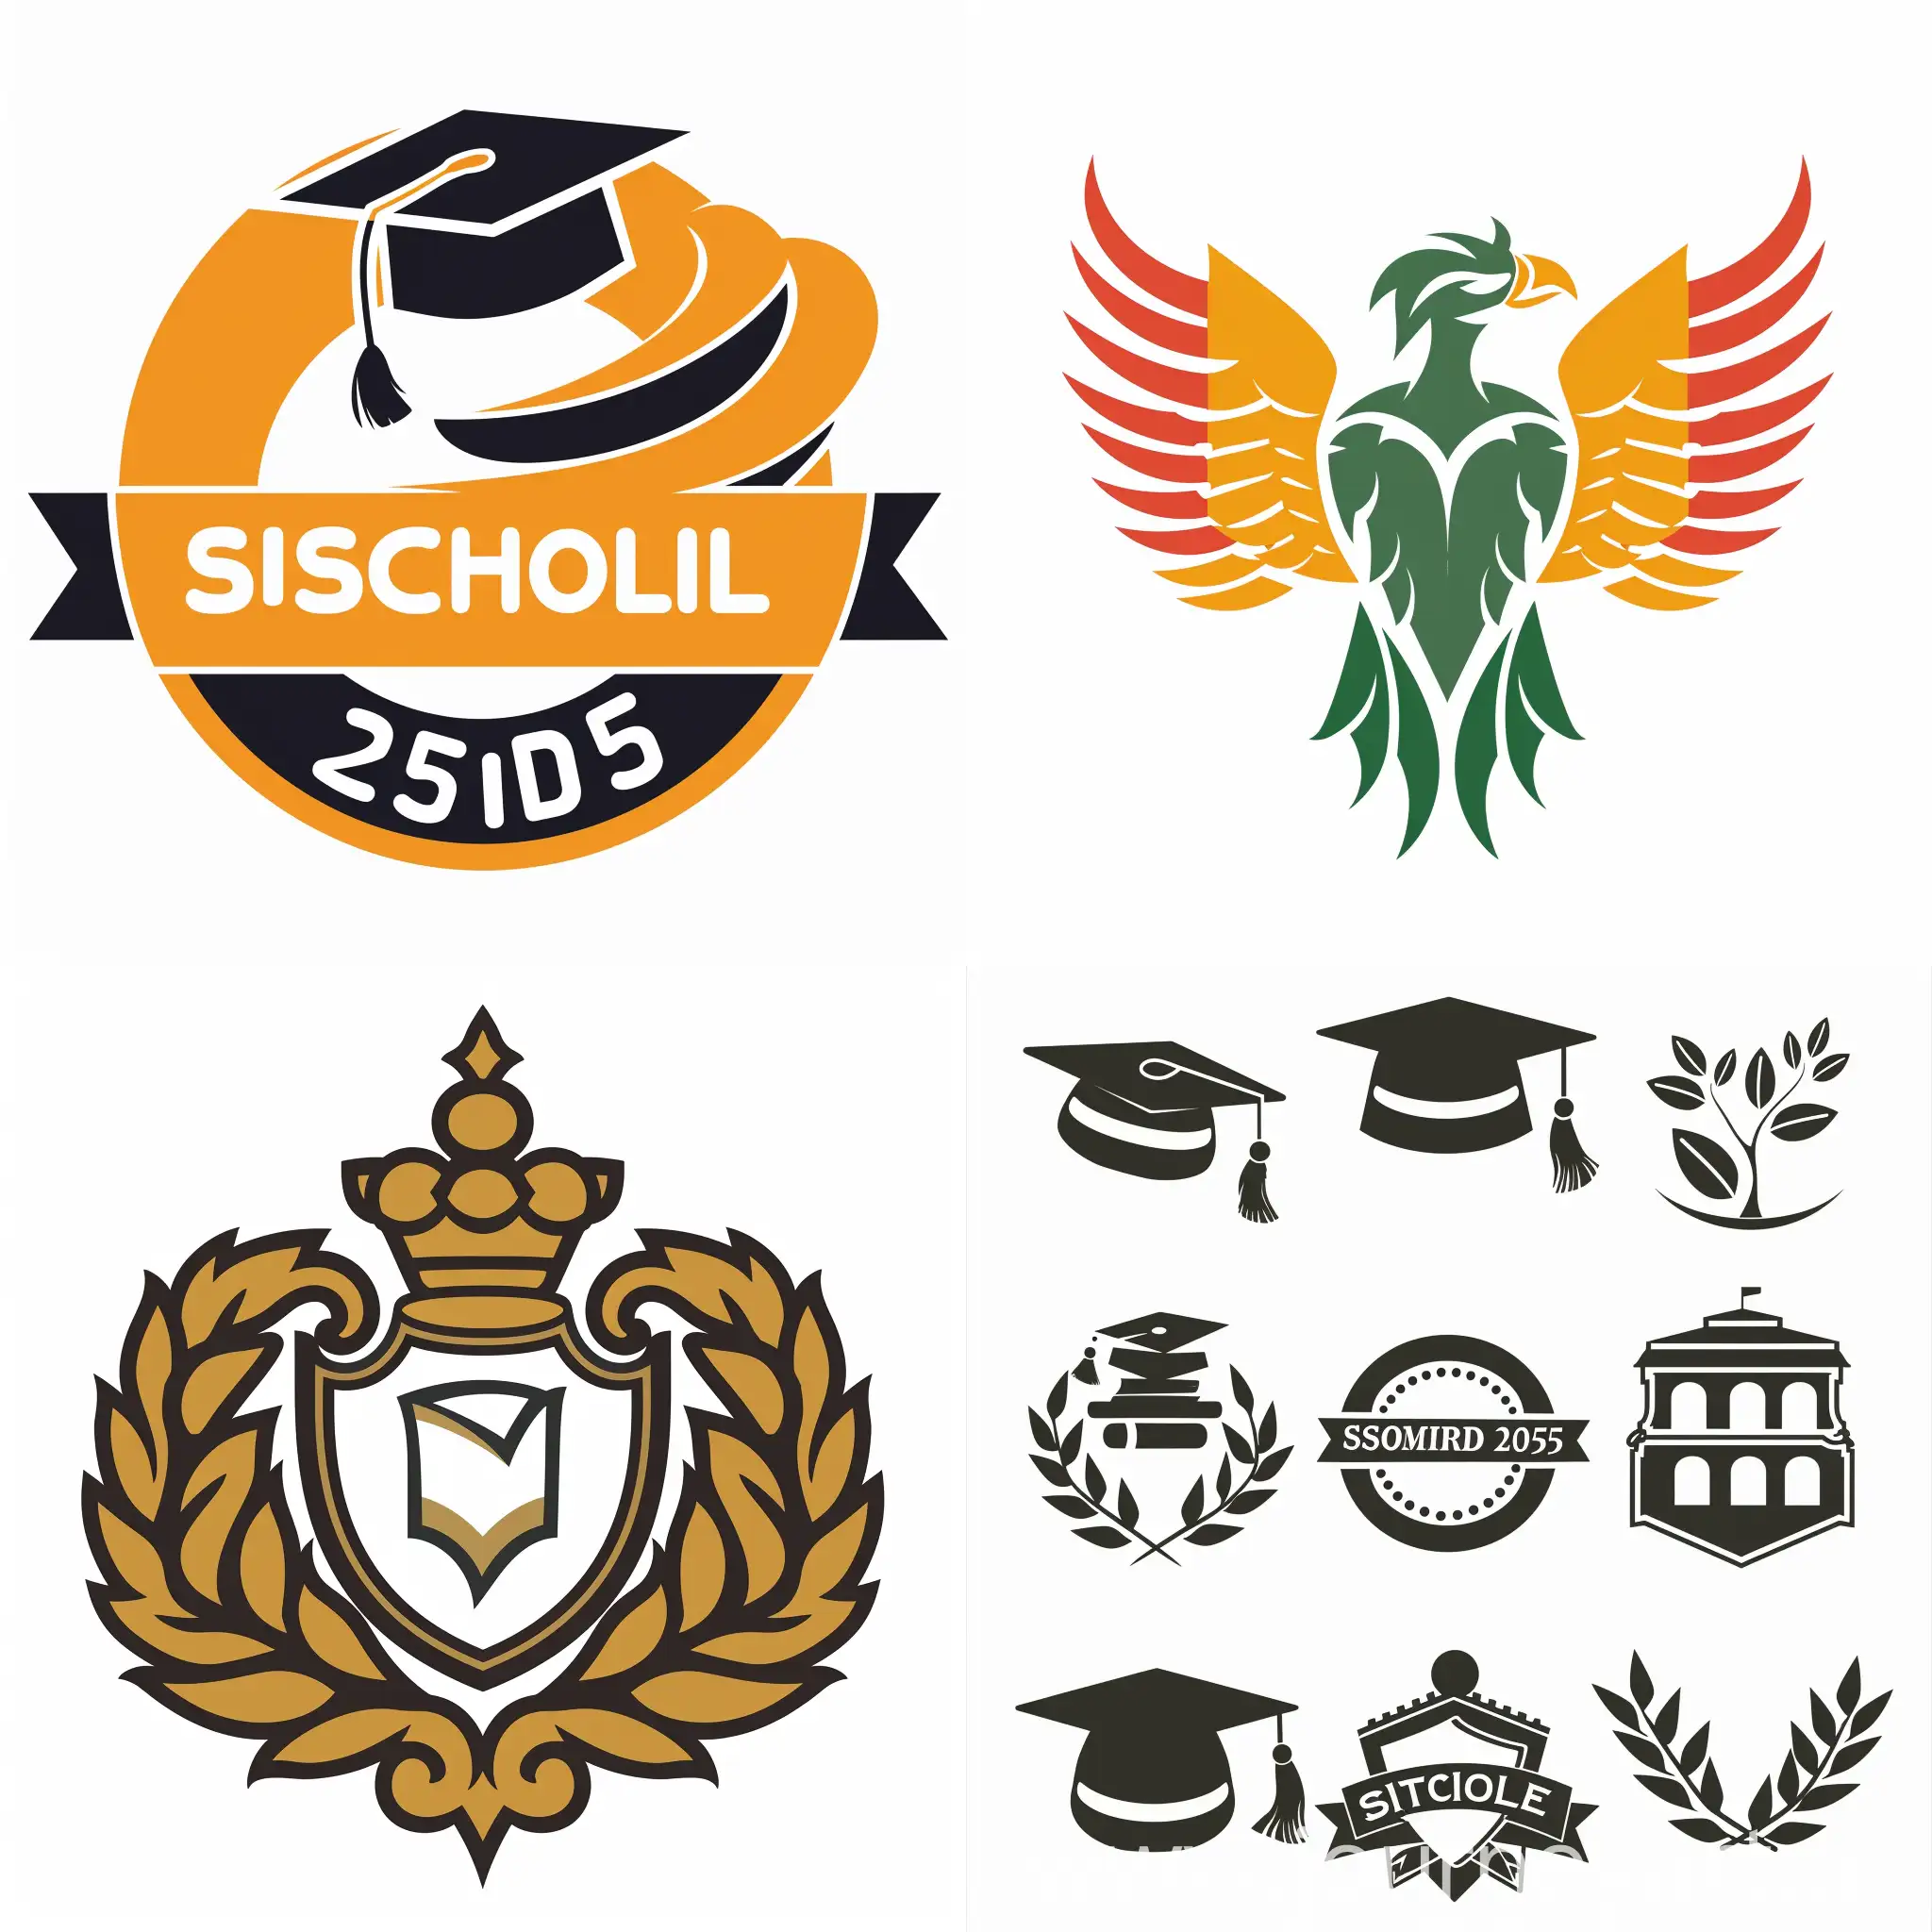 logo for school batch in year 2002 to 2005